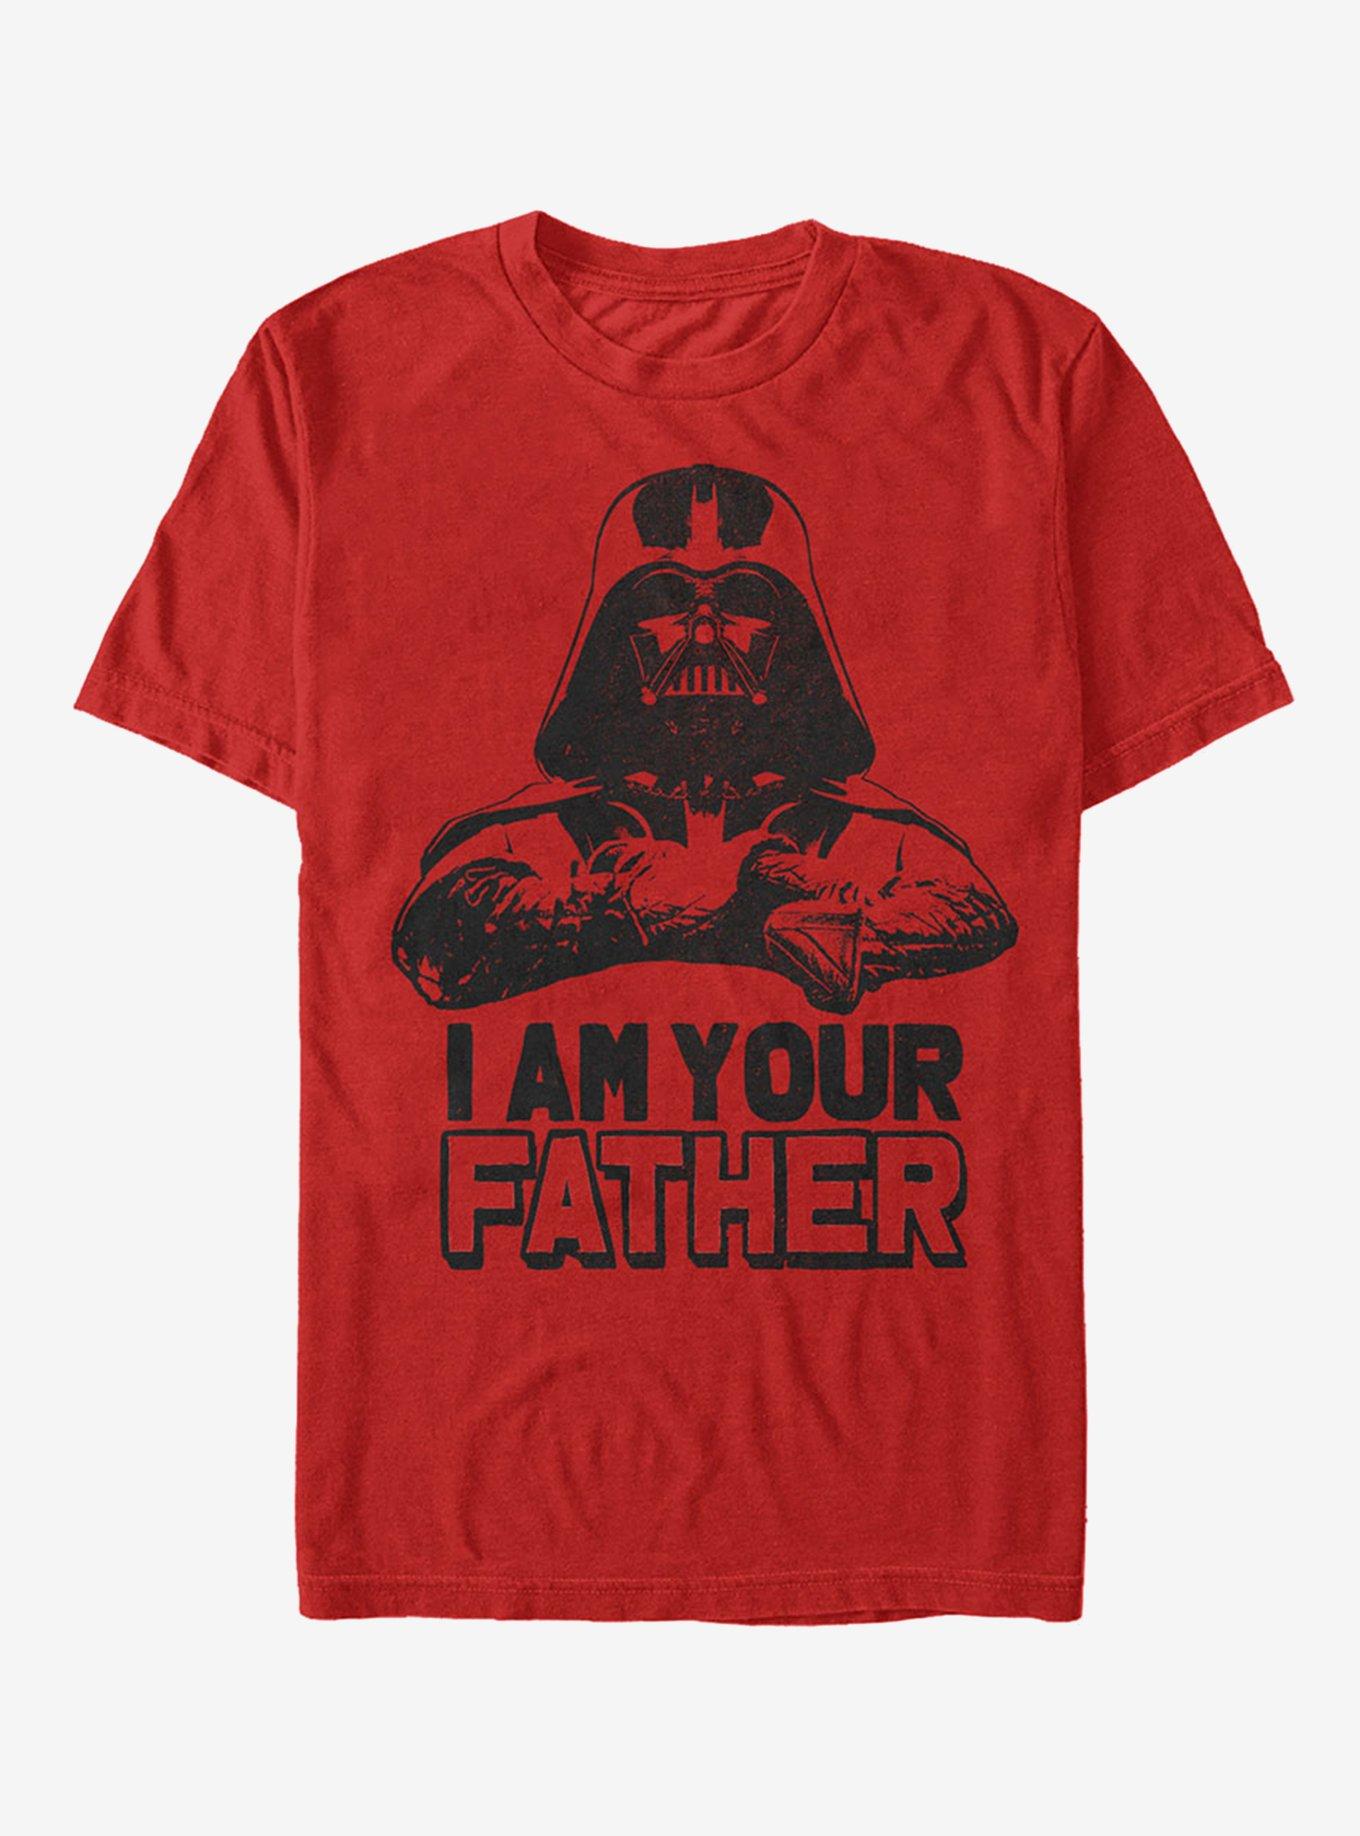 Who's your daddy star wars one piece OR shirt Darth Vader baby